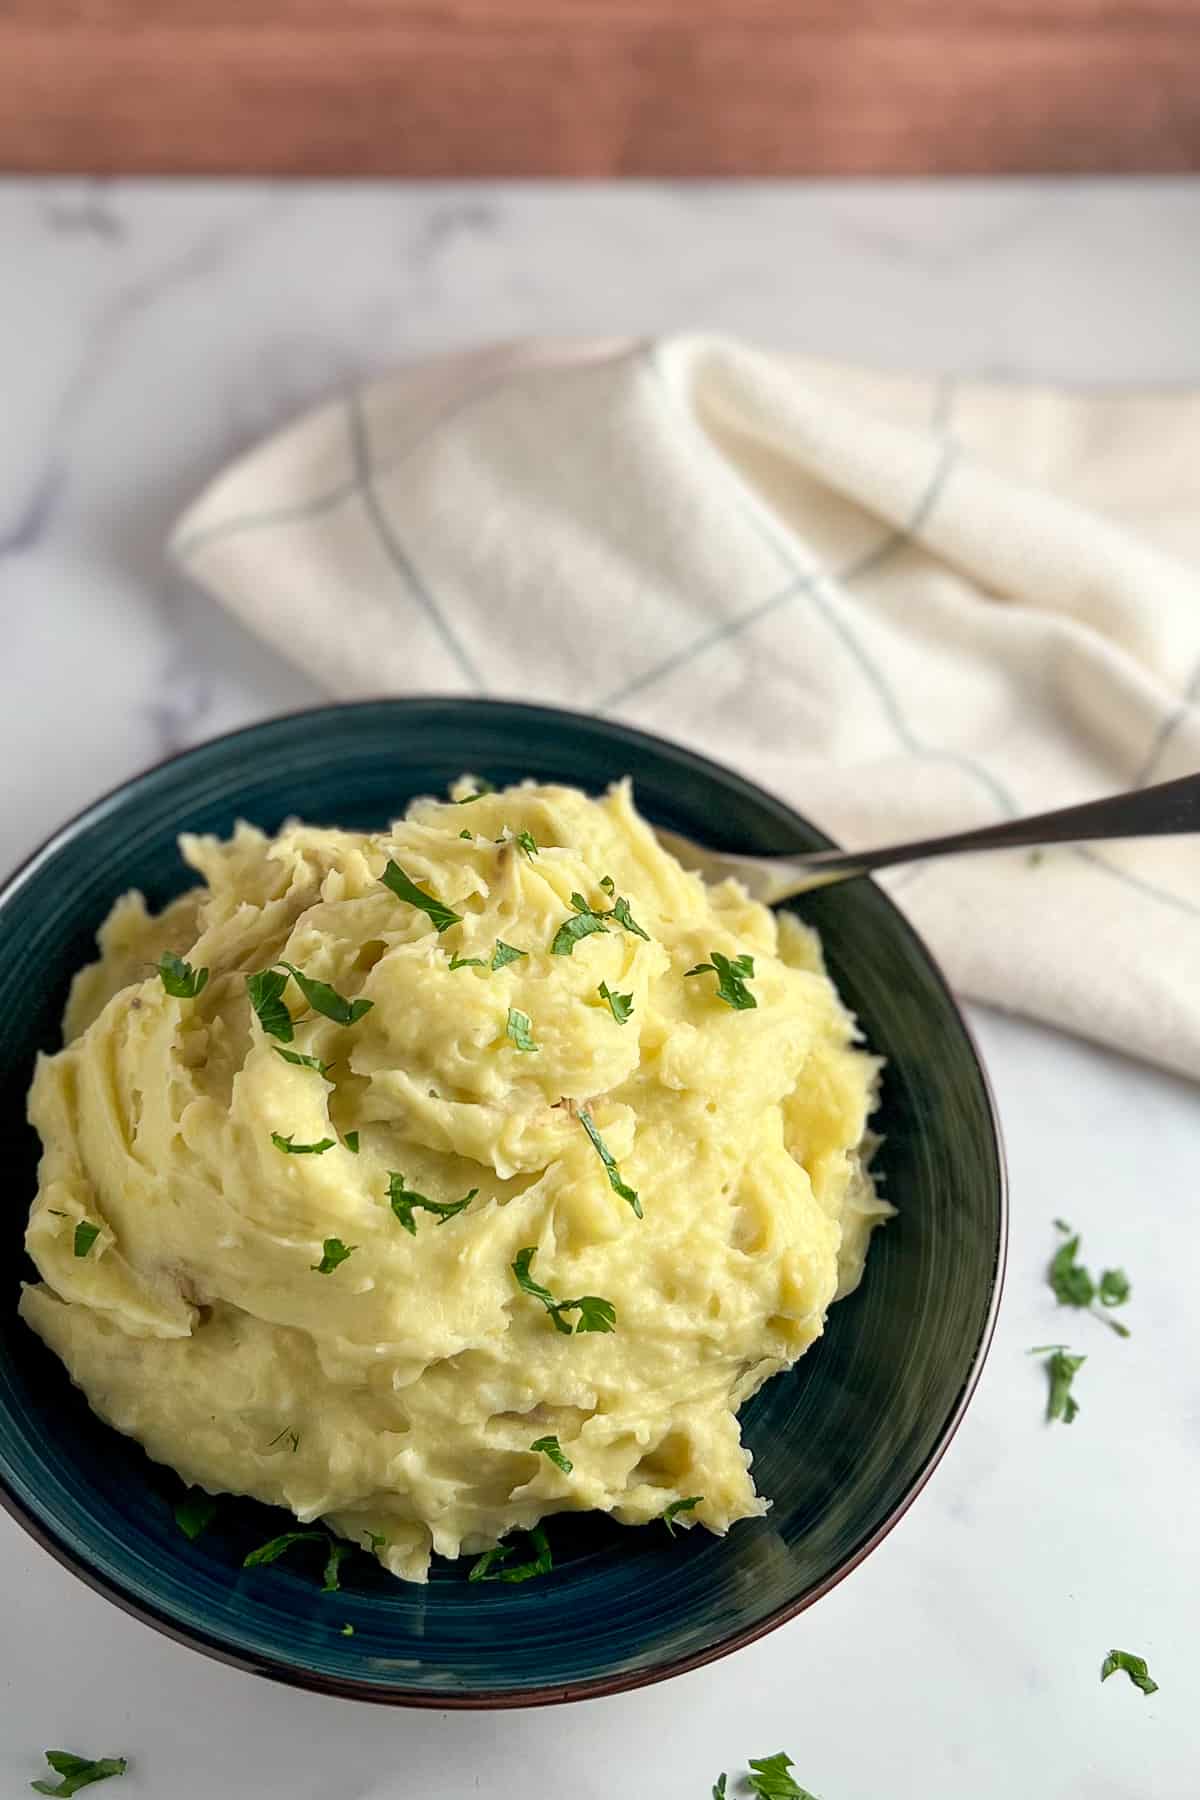 top side view of a bowl of mashed potatoes with fresh chopped parsley and kitchen towel blurred in the background.